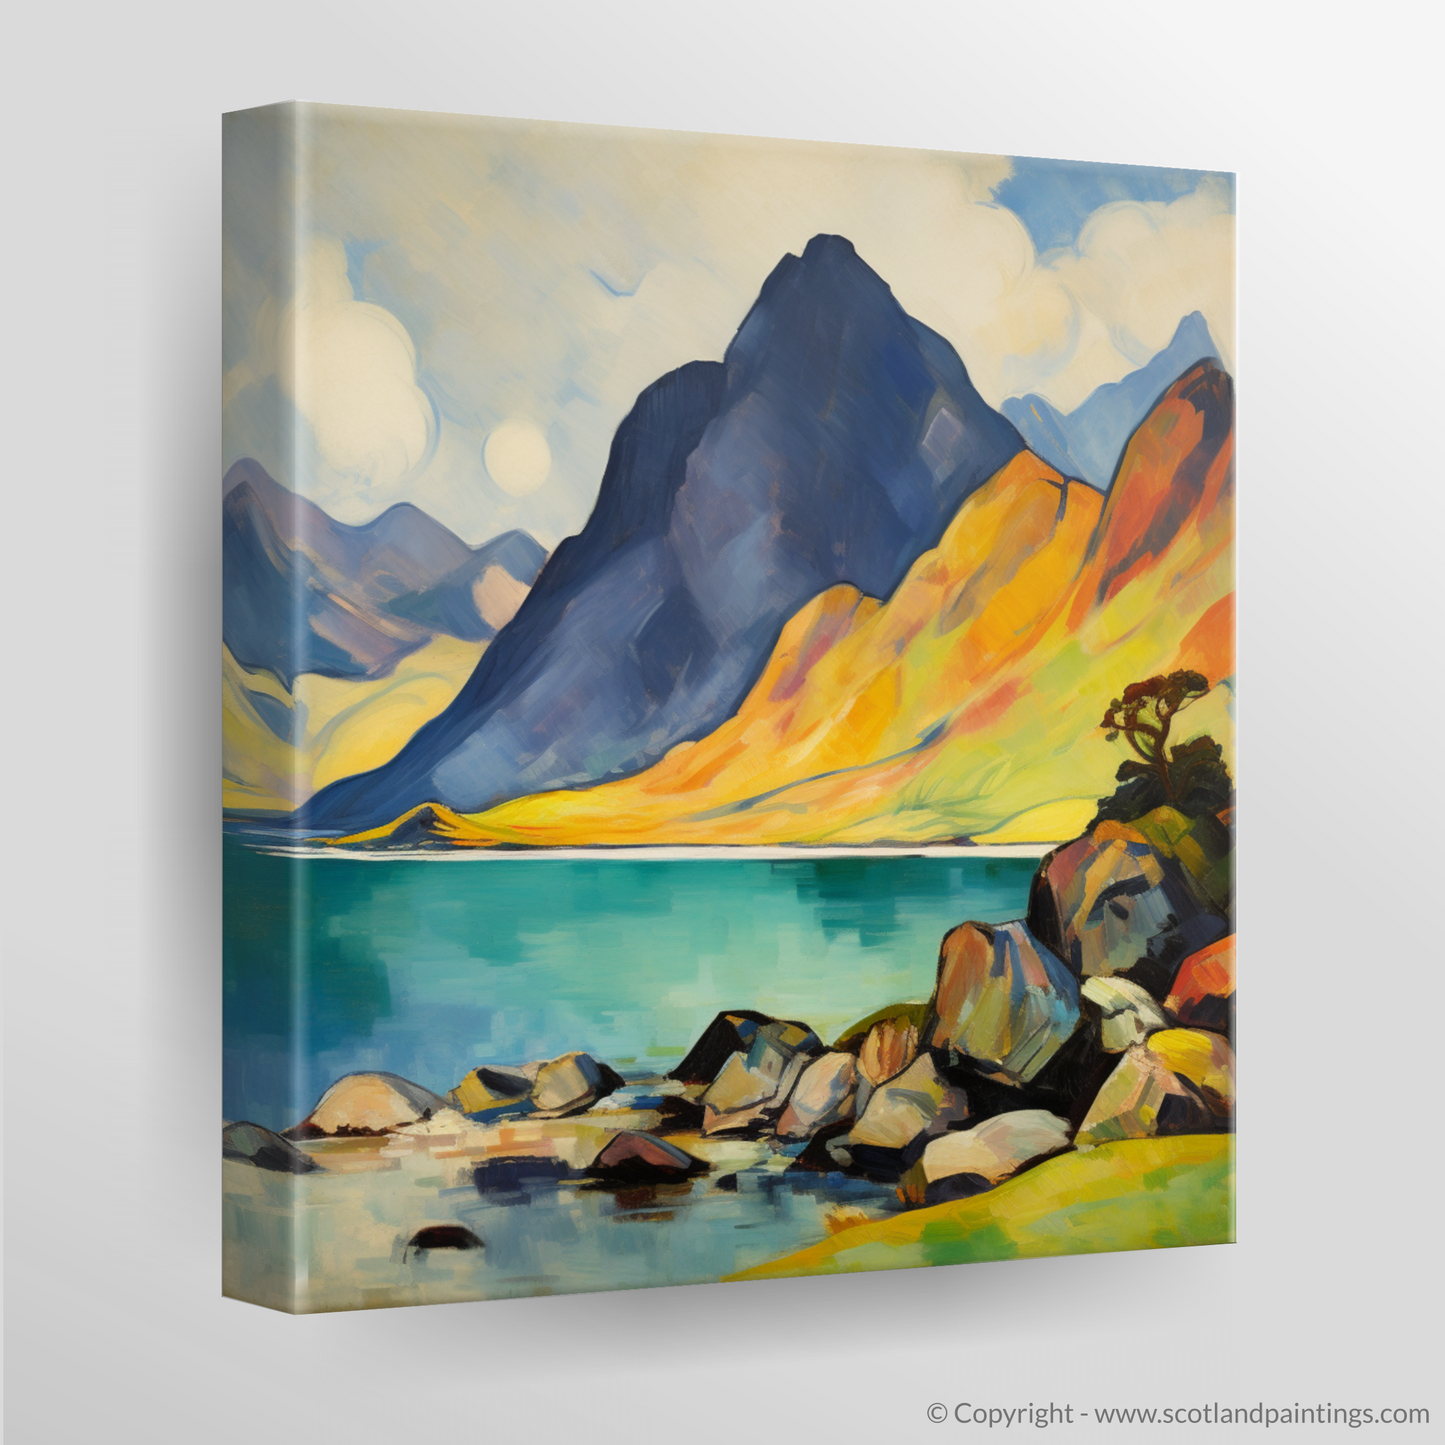 Fiery Sunset Over Loch Coruisk - A Fauvist Ode to the Isle of Skye